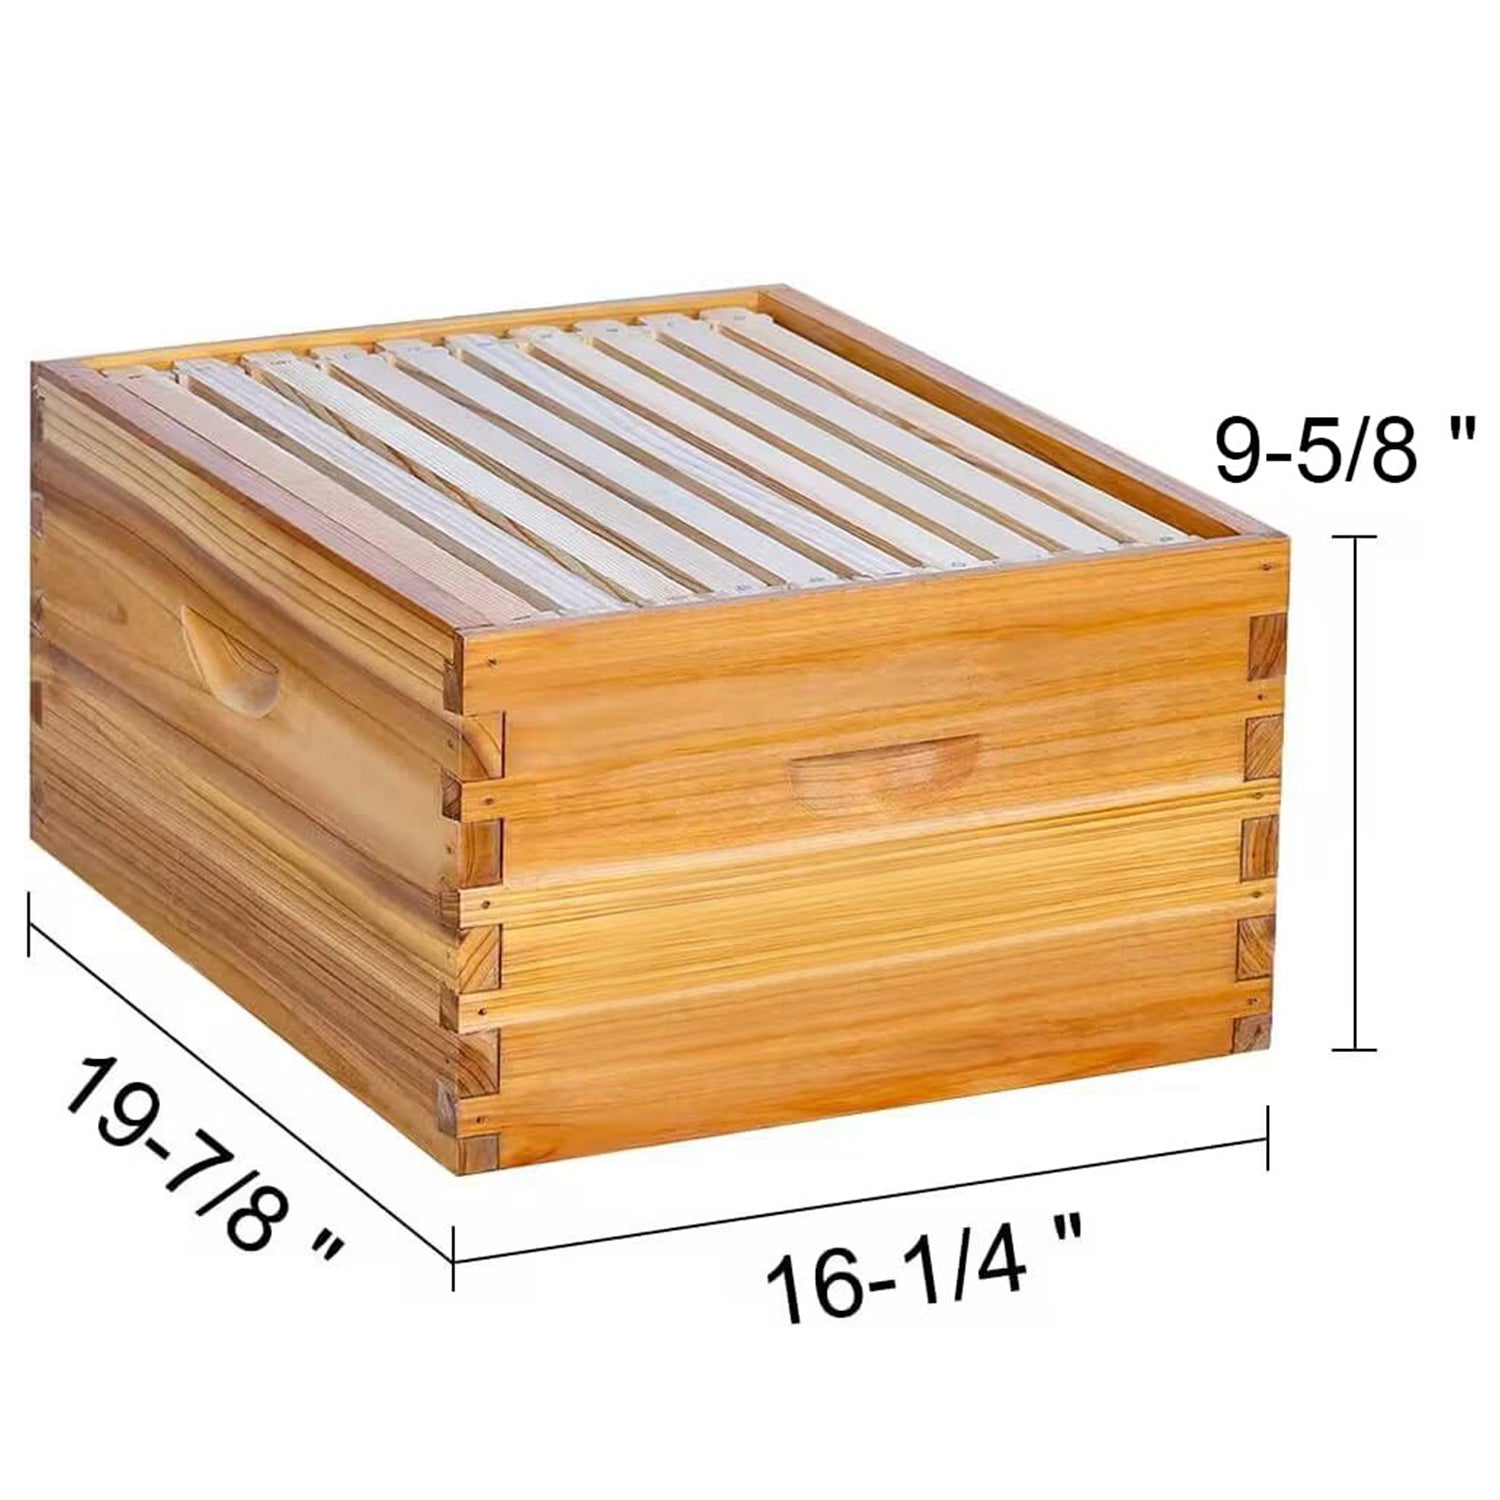 10-frame deep box:Deep boxes are typically used to hold the main frames of the hive,where bees store honey and royal jelly.